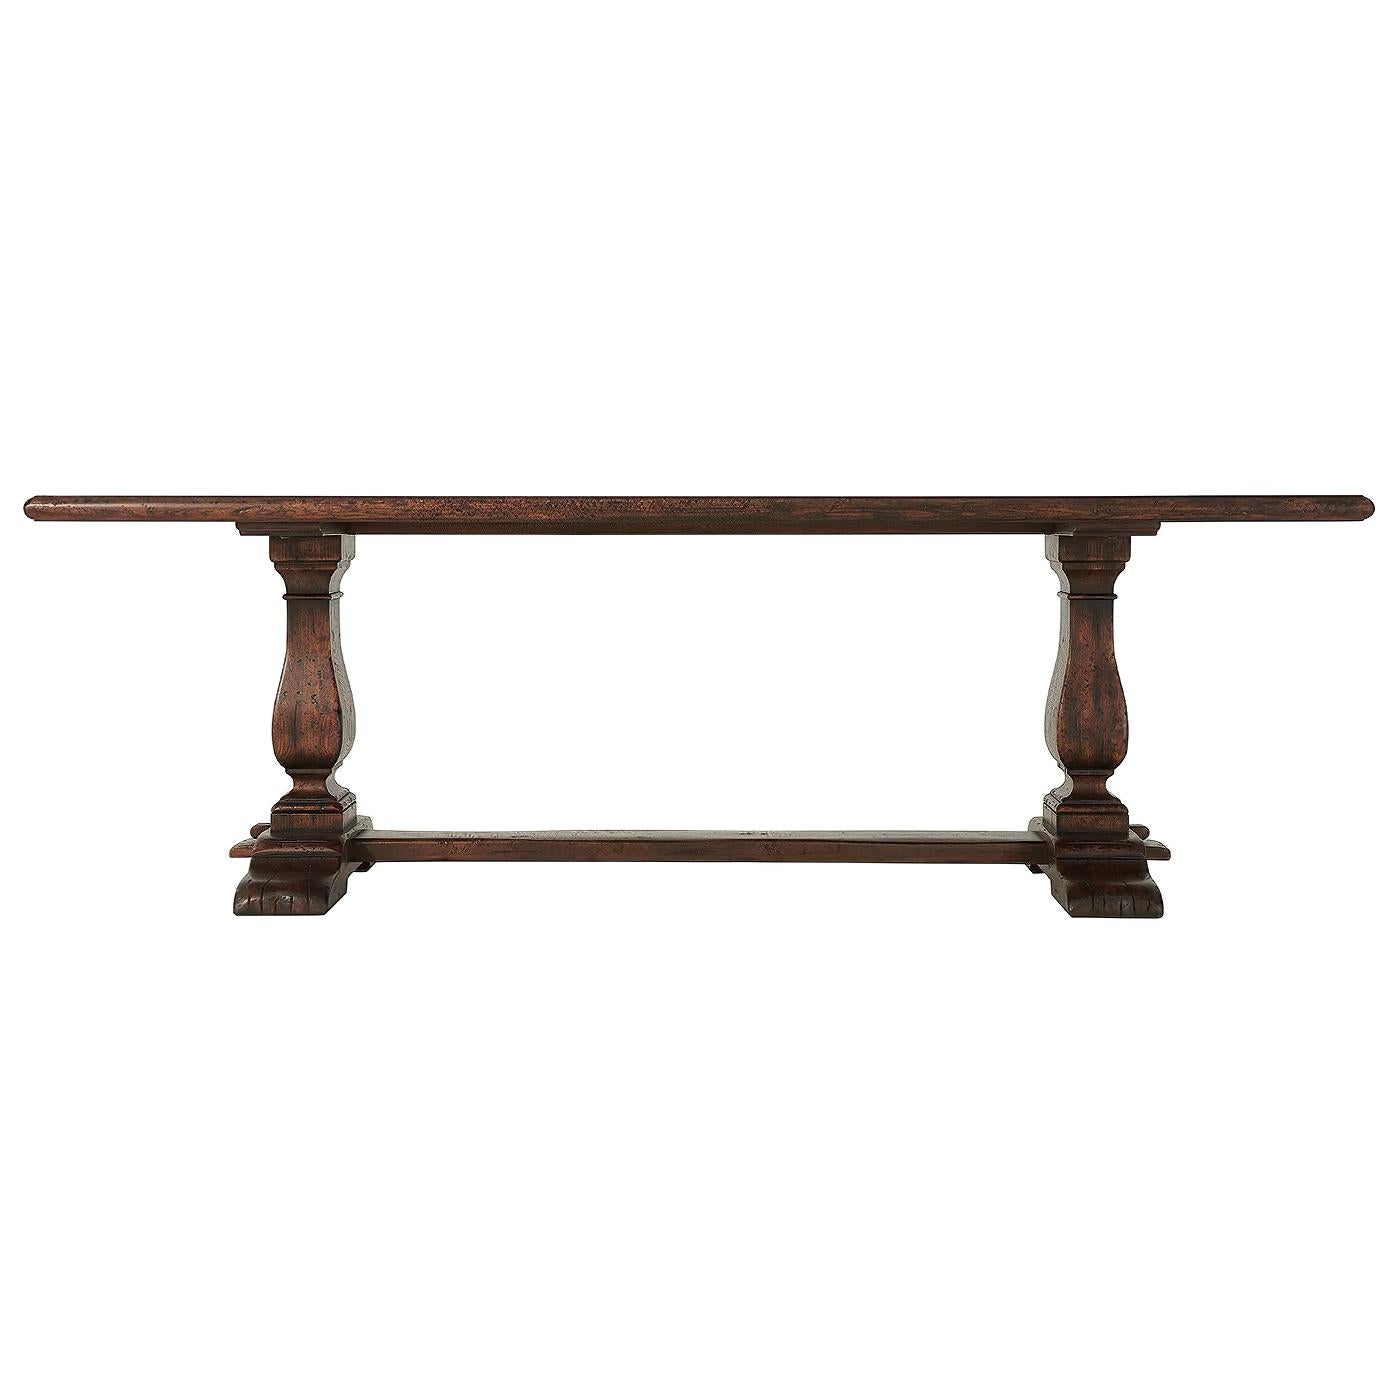 A reclaimed oak veneered refectory table, the planked rectangular moulded edge top above vase column supports and bases joined by a long stretcher. Inspired by a 17th century English original.

Dimensions: 92